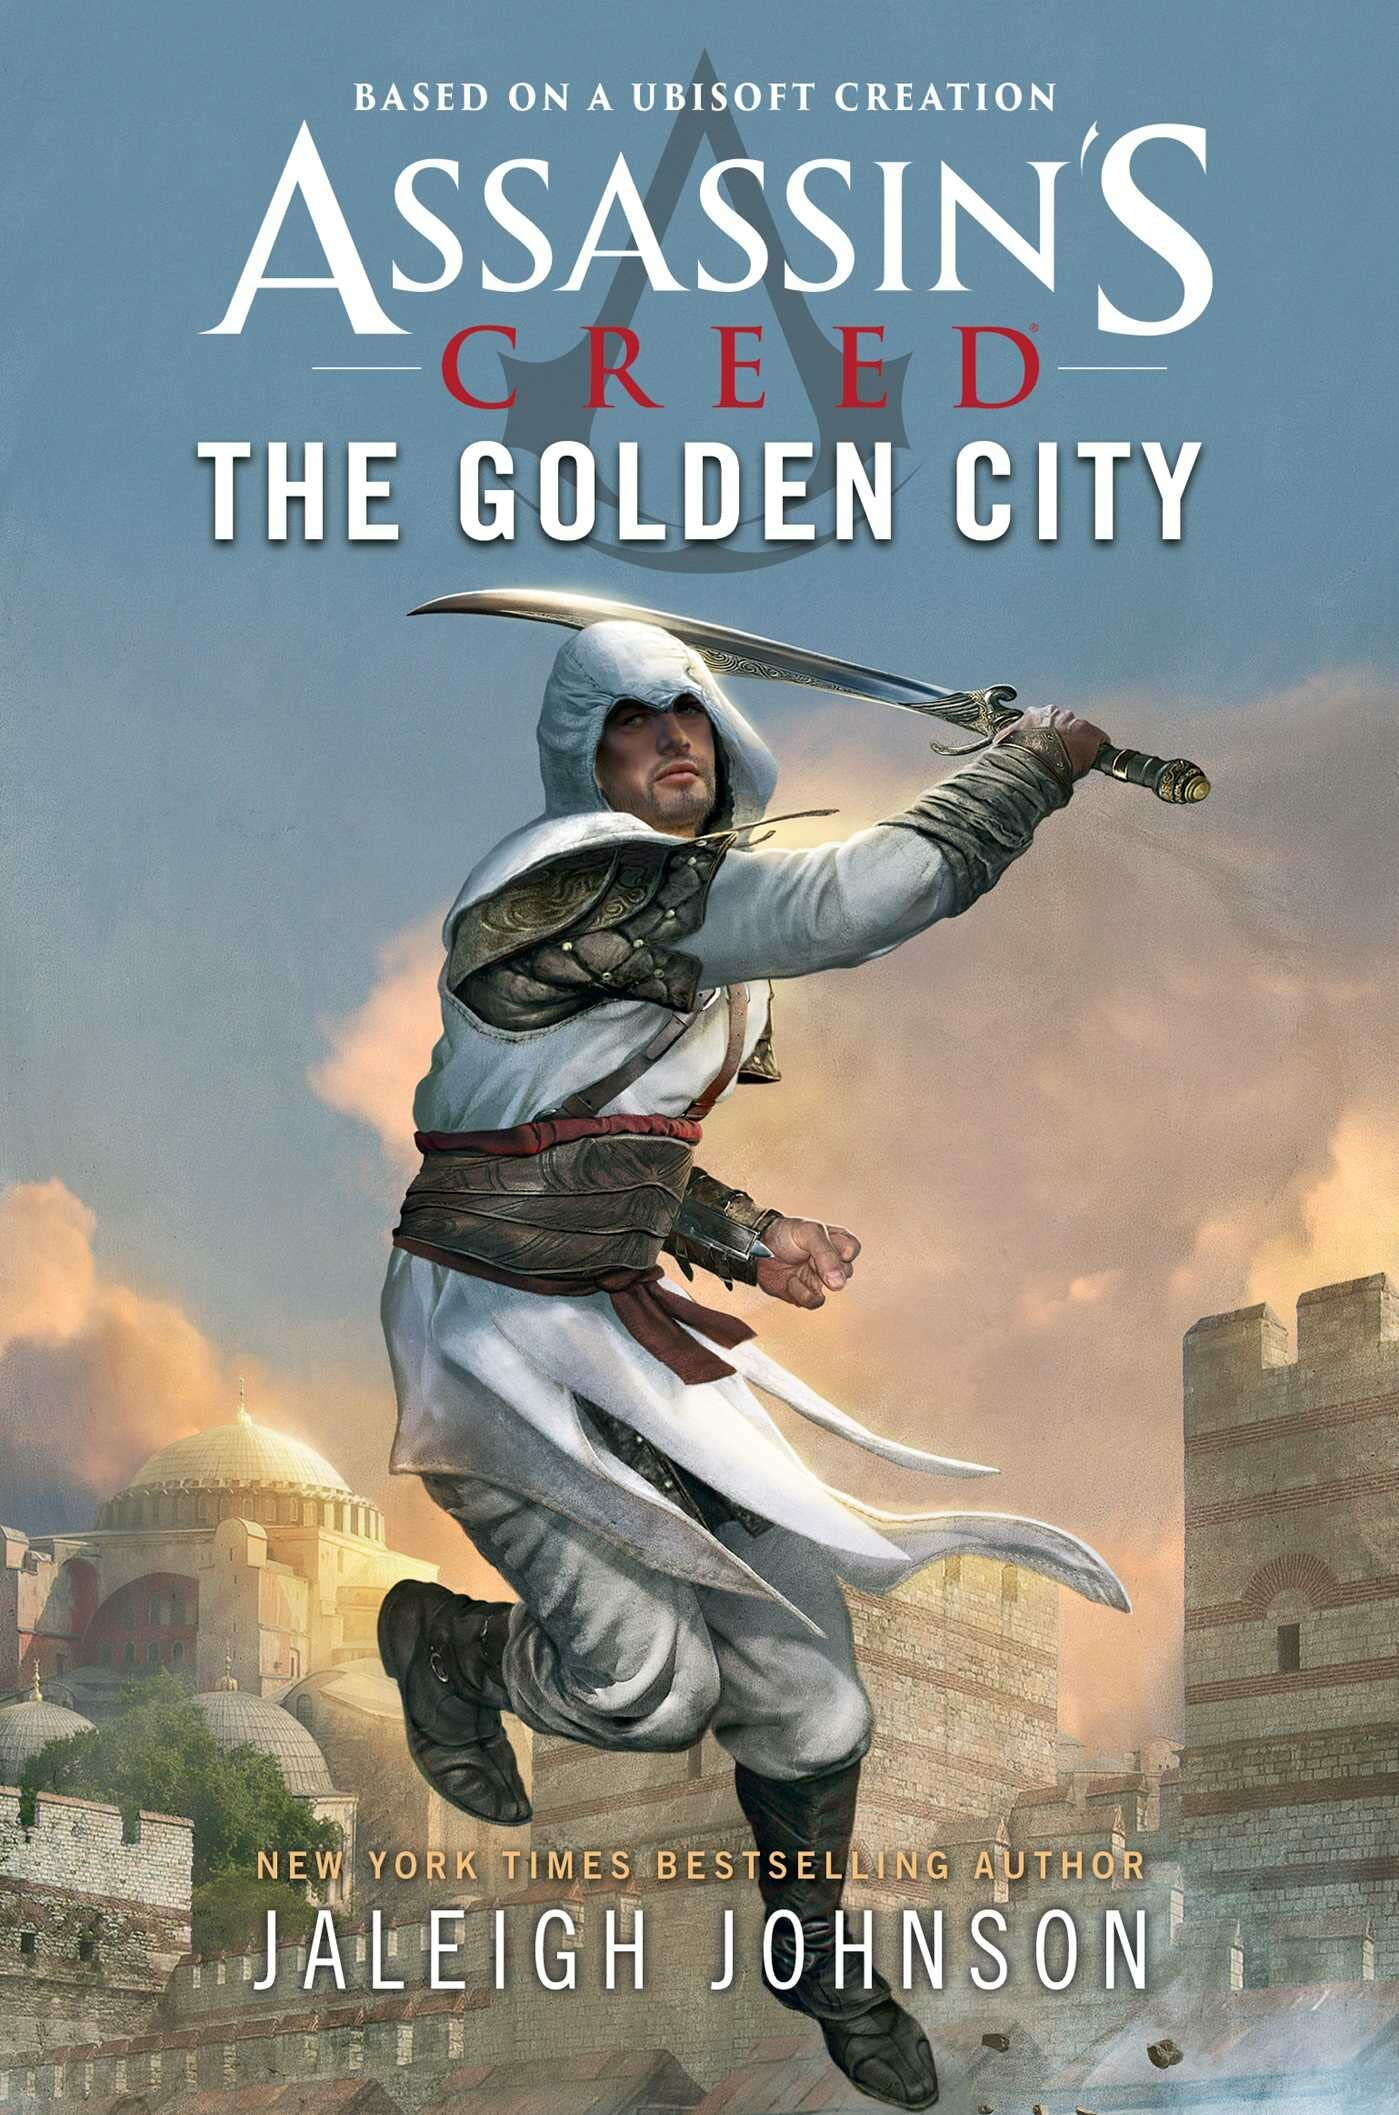 The Golden City (Assassin's Creed #3)